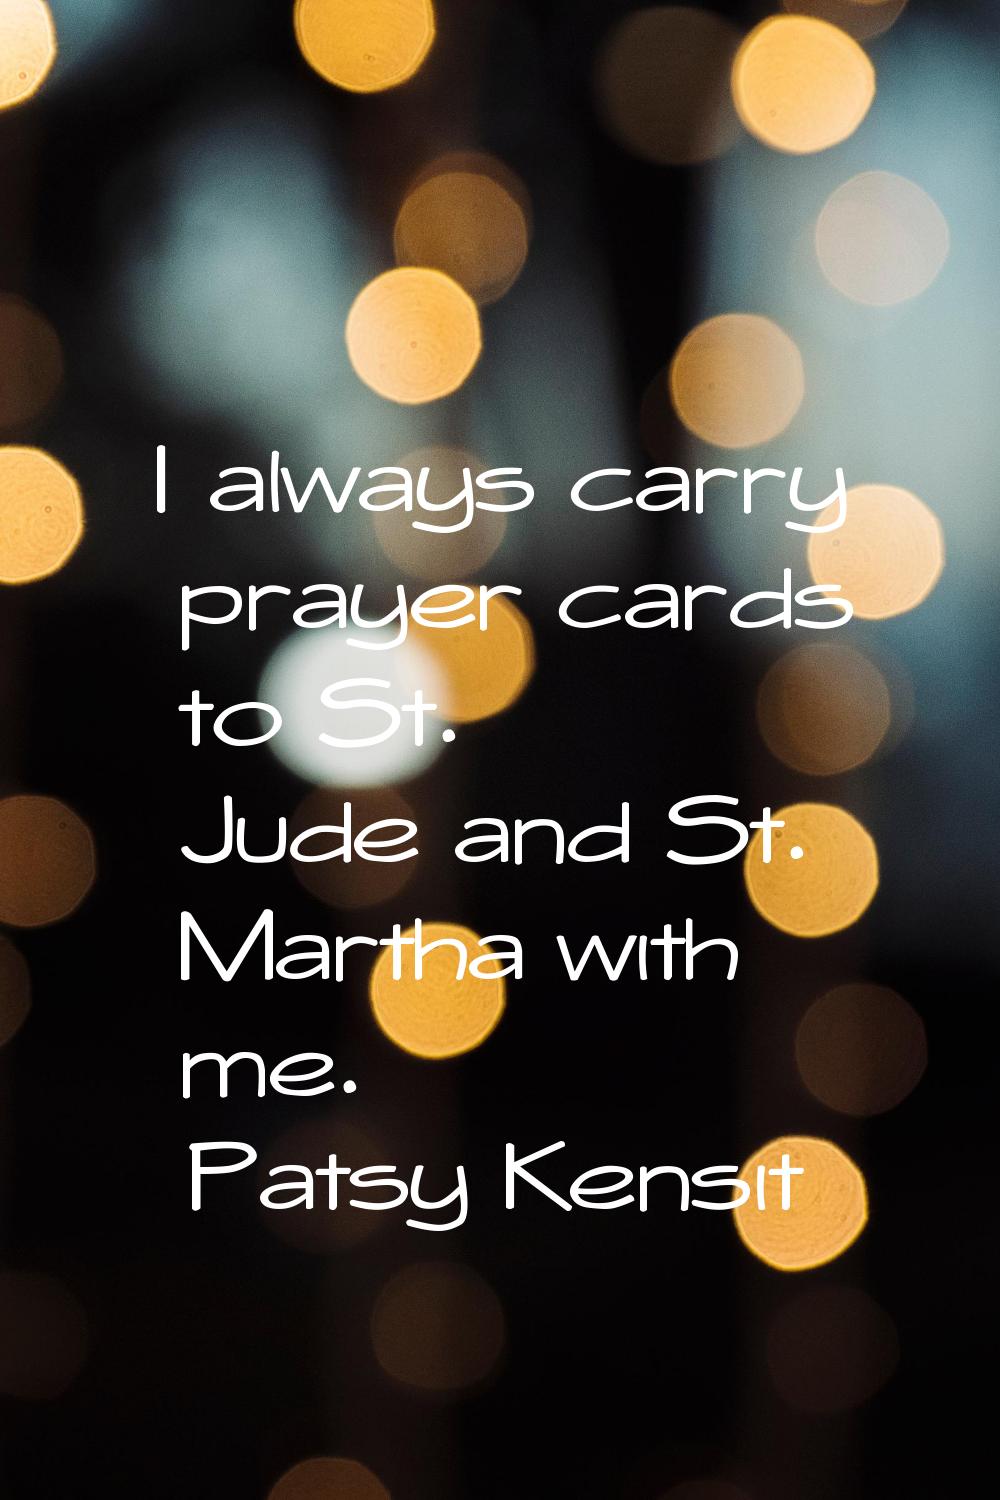 I always carry prayer cards to St. Jude and St. Martha with me.